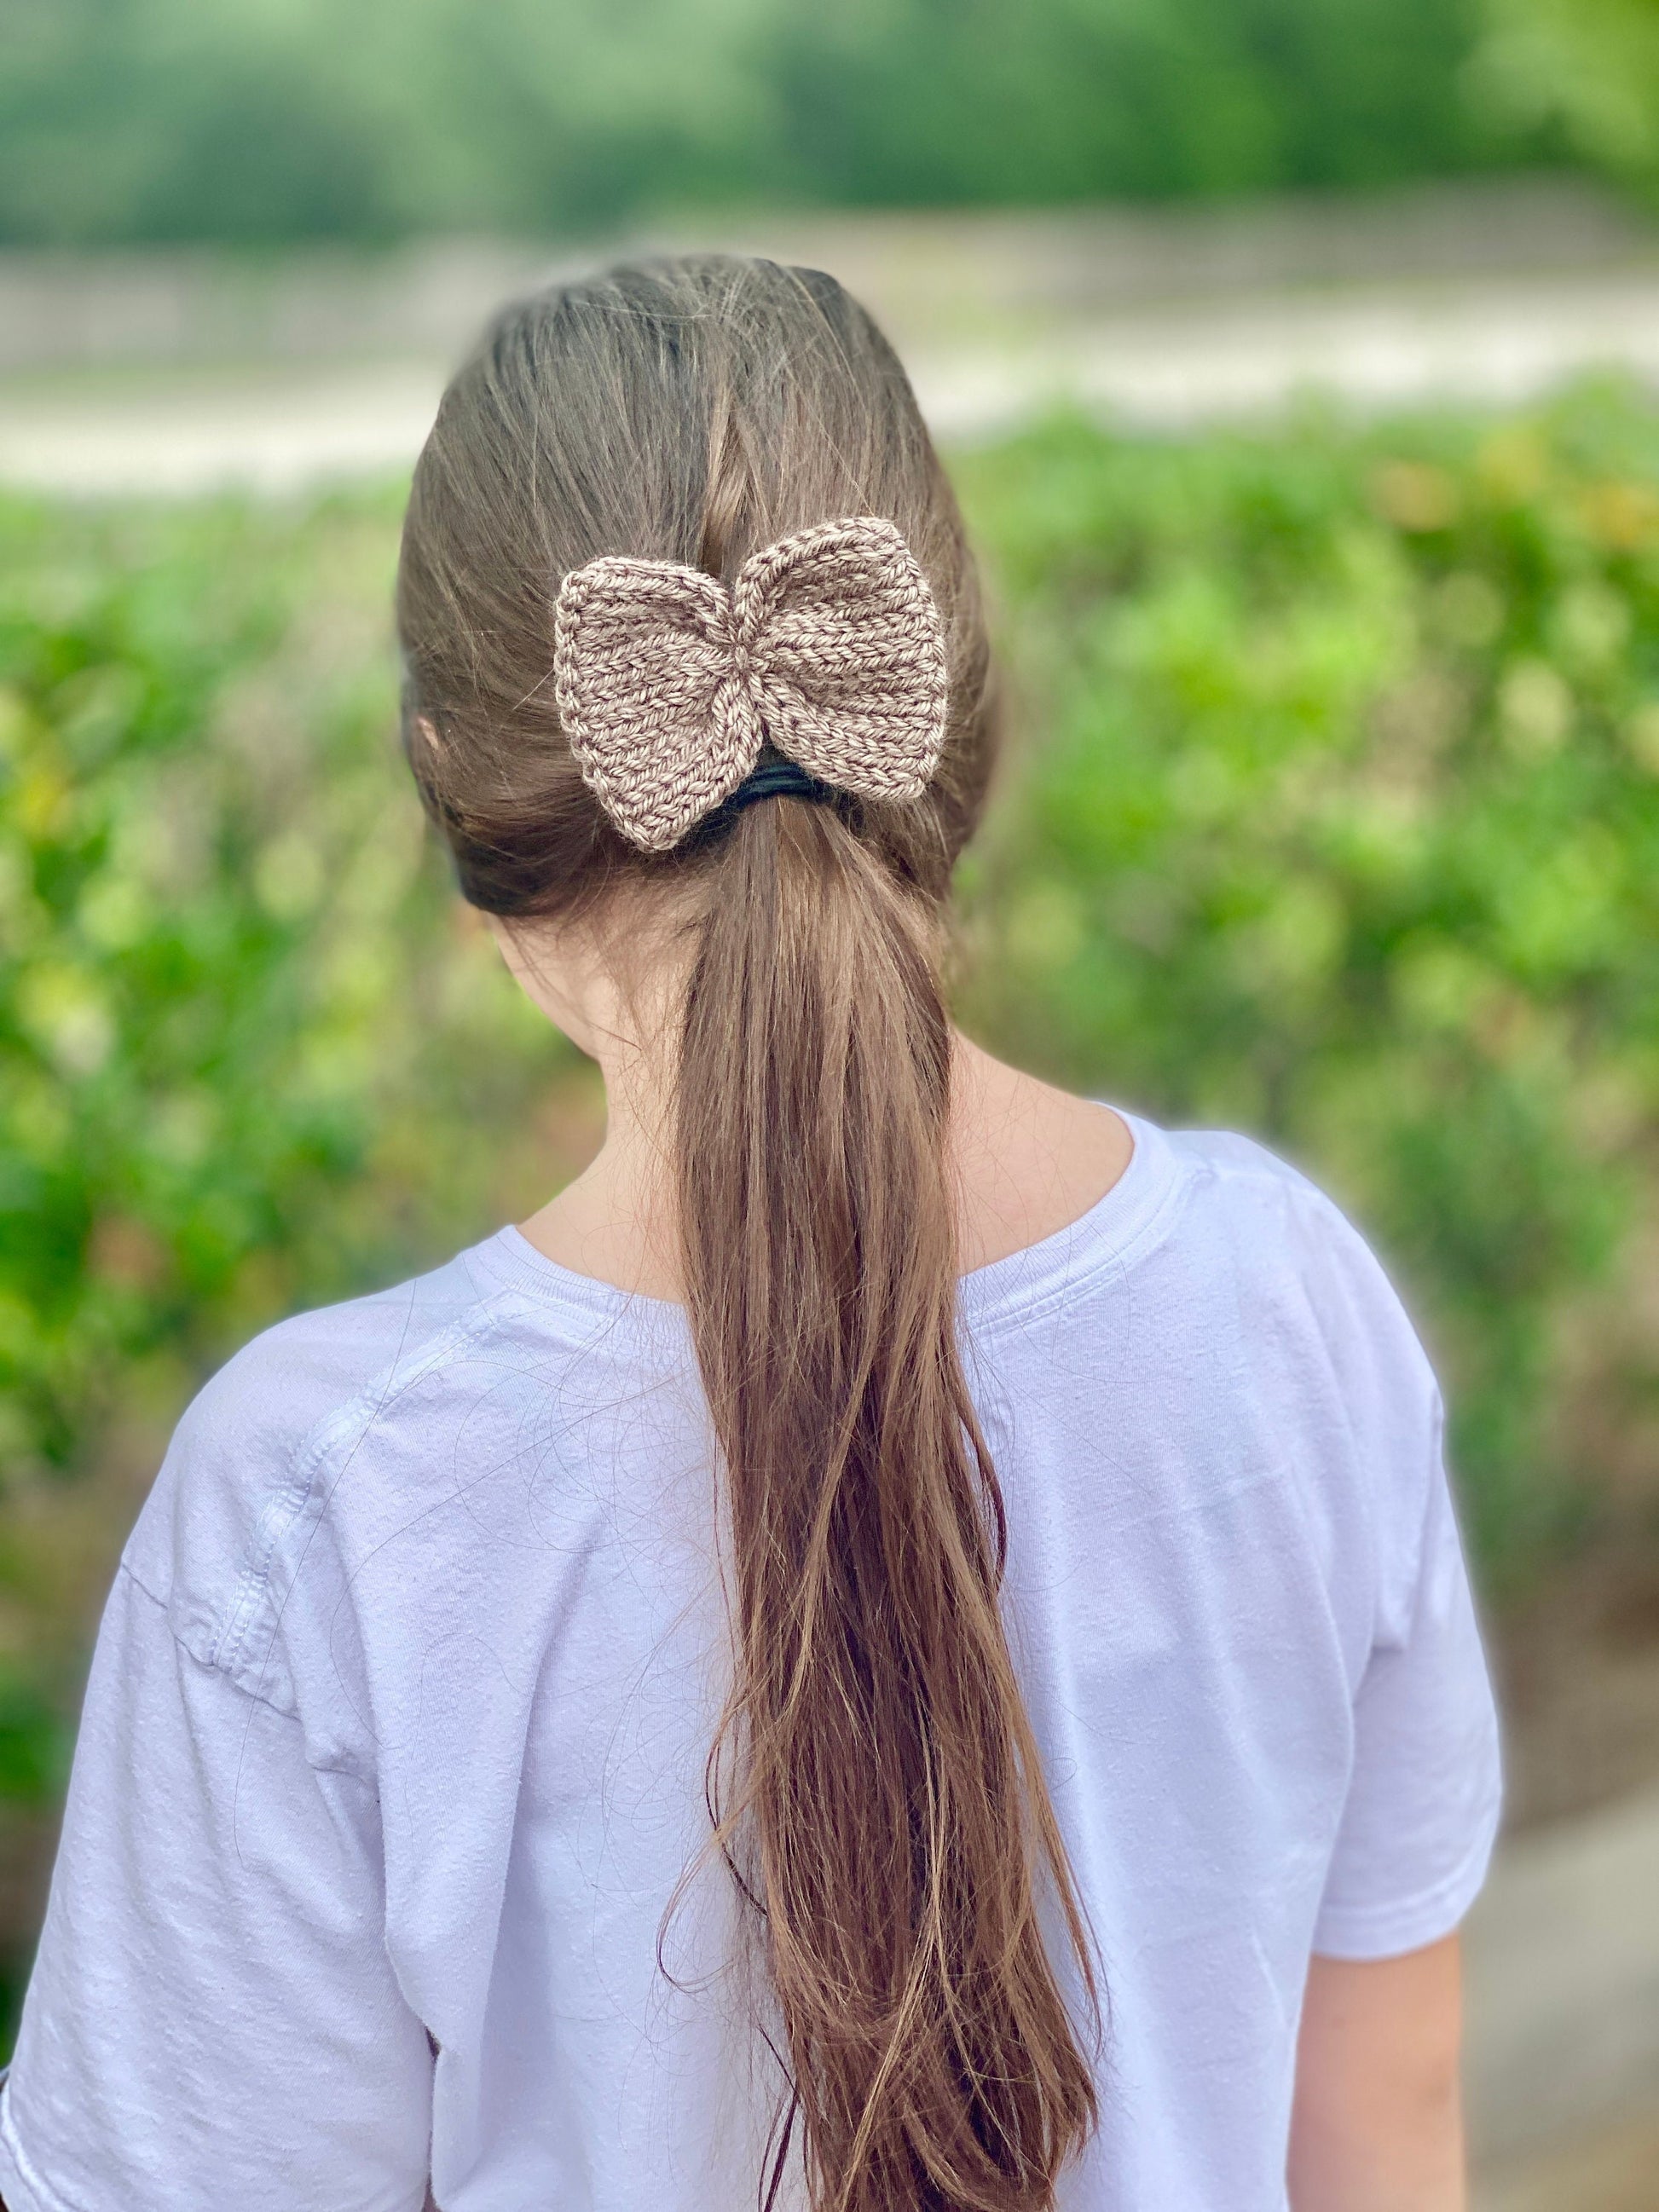 Knitted Hair Bow Clip, Knitted Hair Tie Bow, Soft Knitted Hair Accessory Bow, Knit Bow Barrette, Chic Knitted Bow Ponytail Holder,